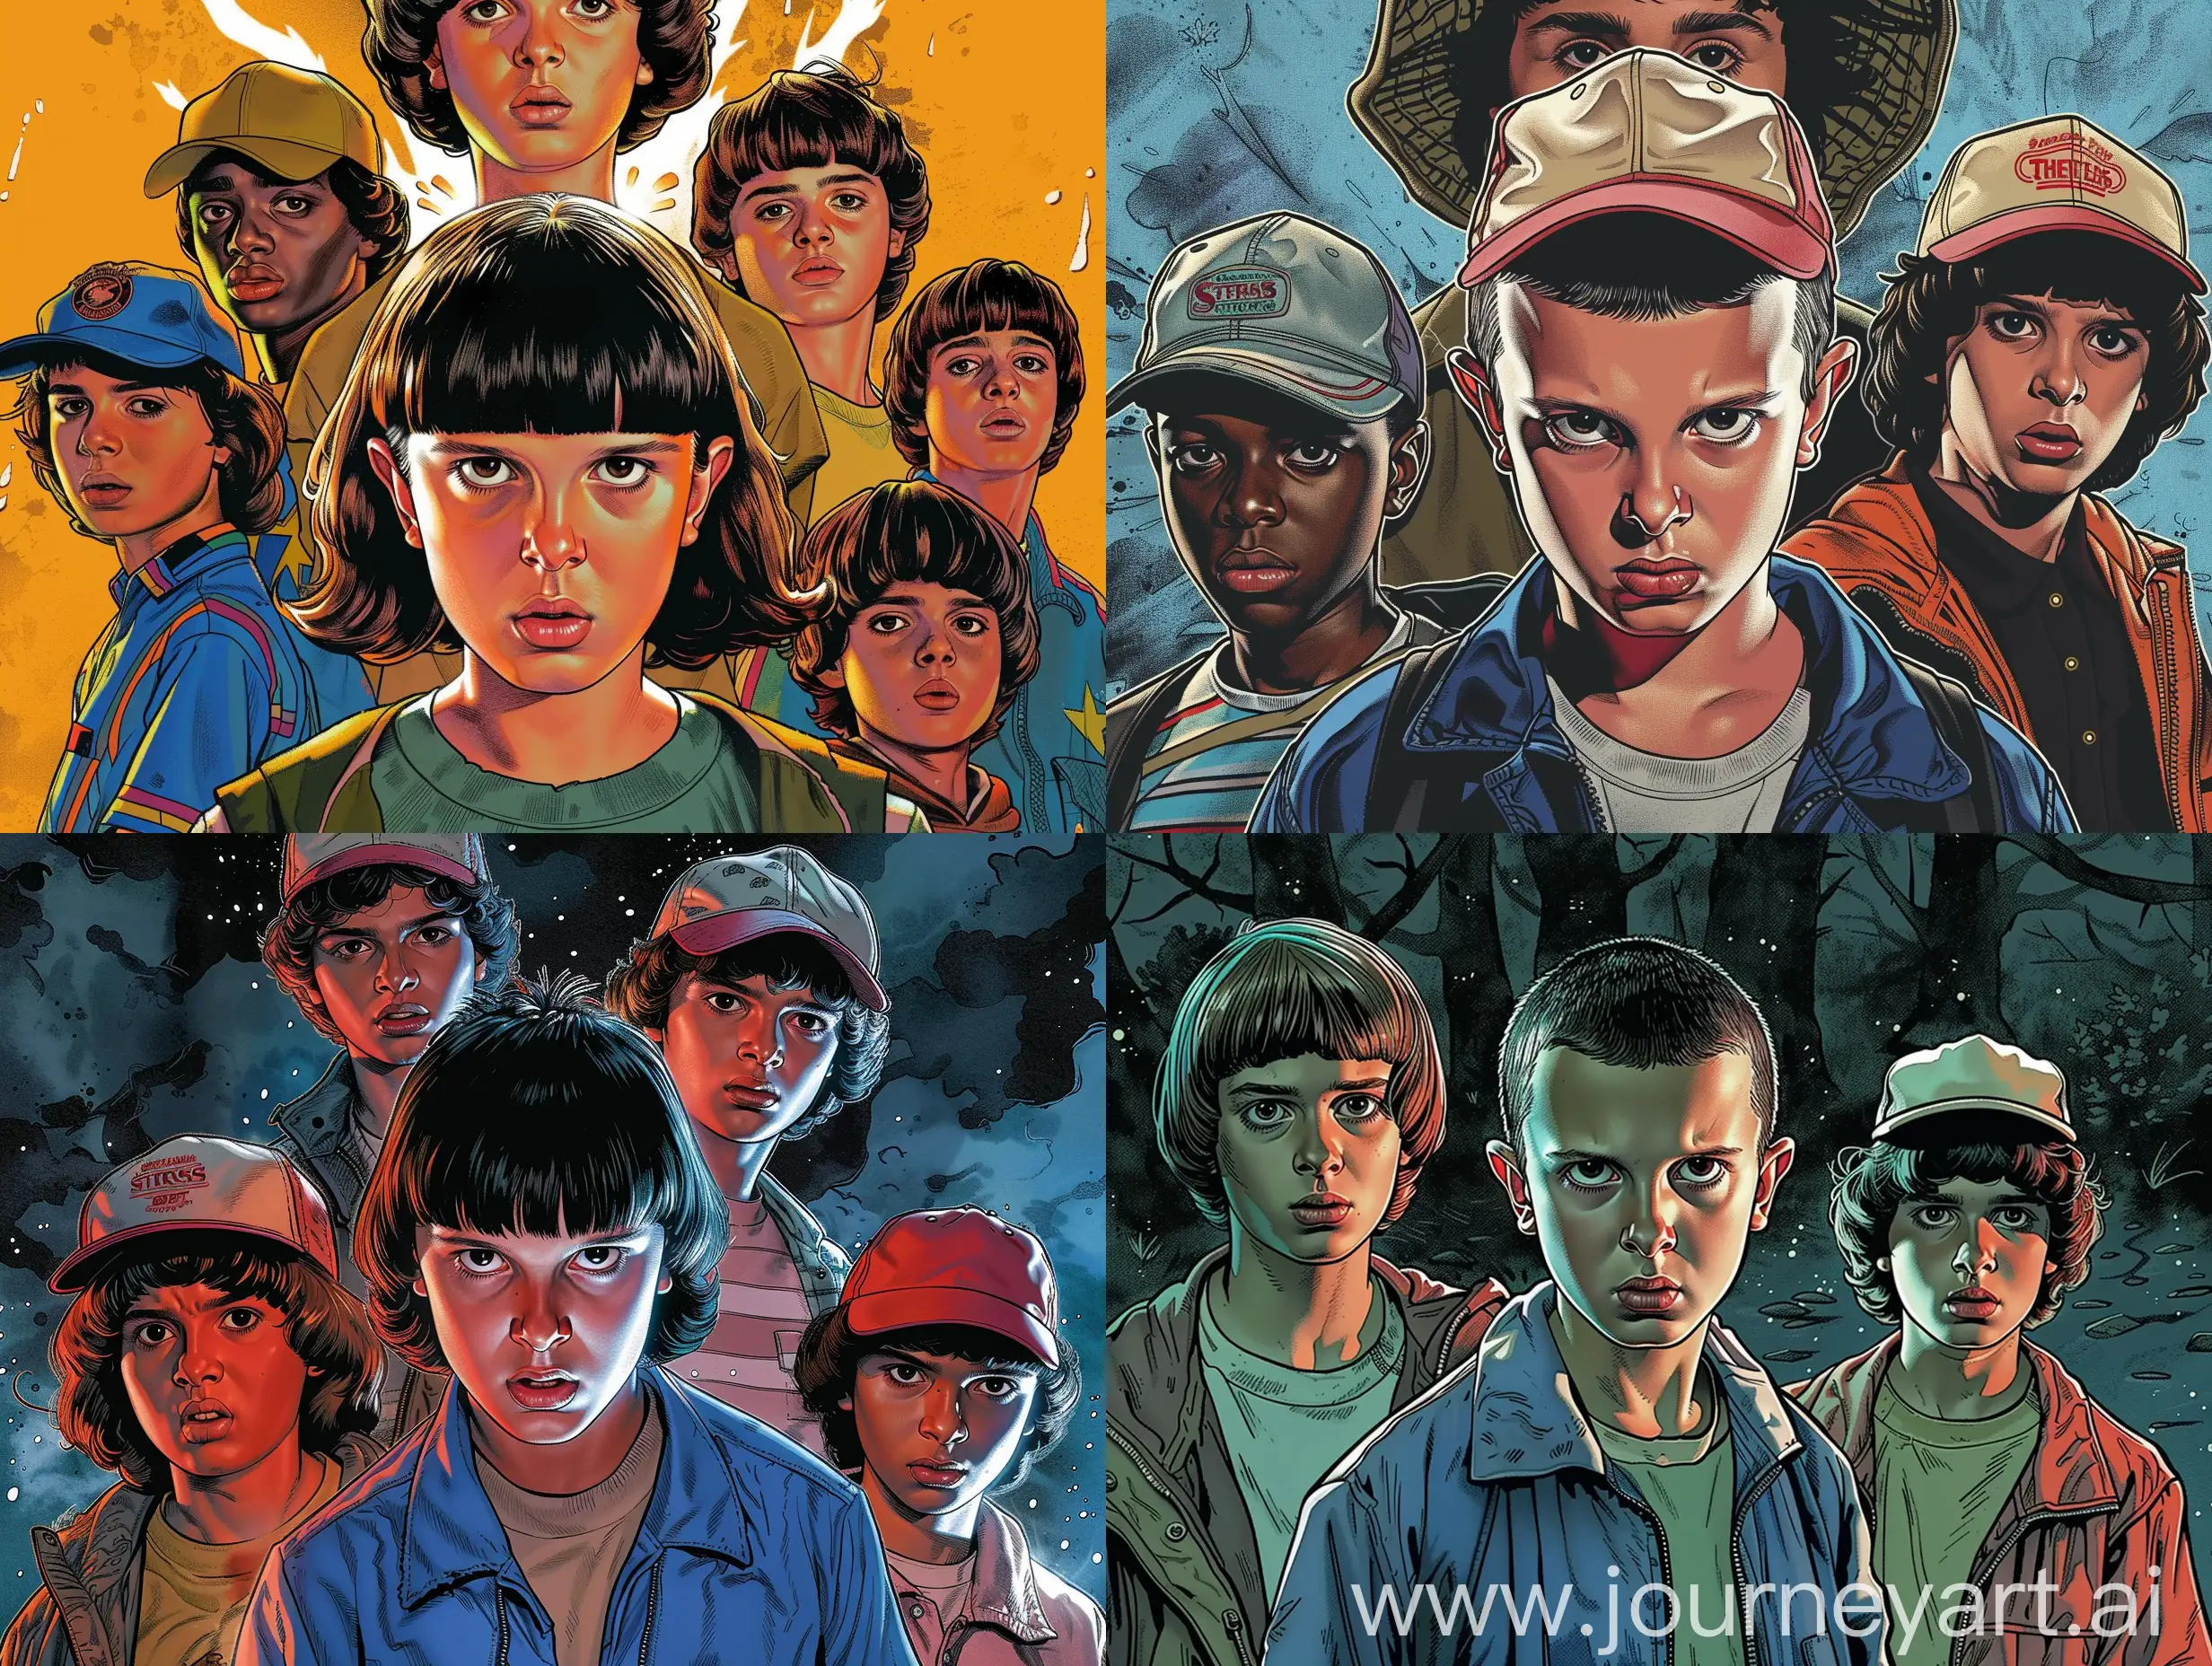 Retro-Comic-Art-Illustration-of-Stranger-Things-Characters-in-1960s-Style